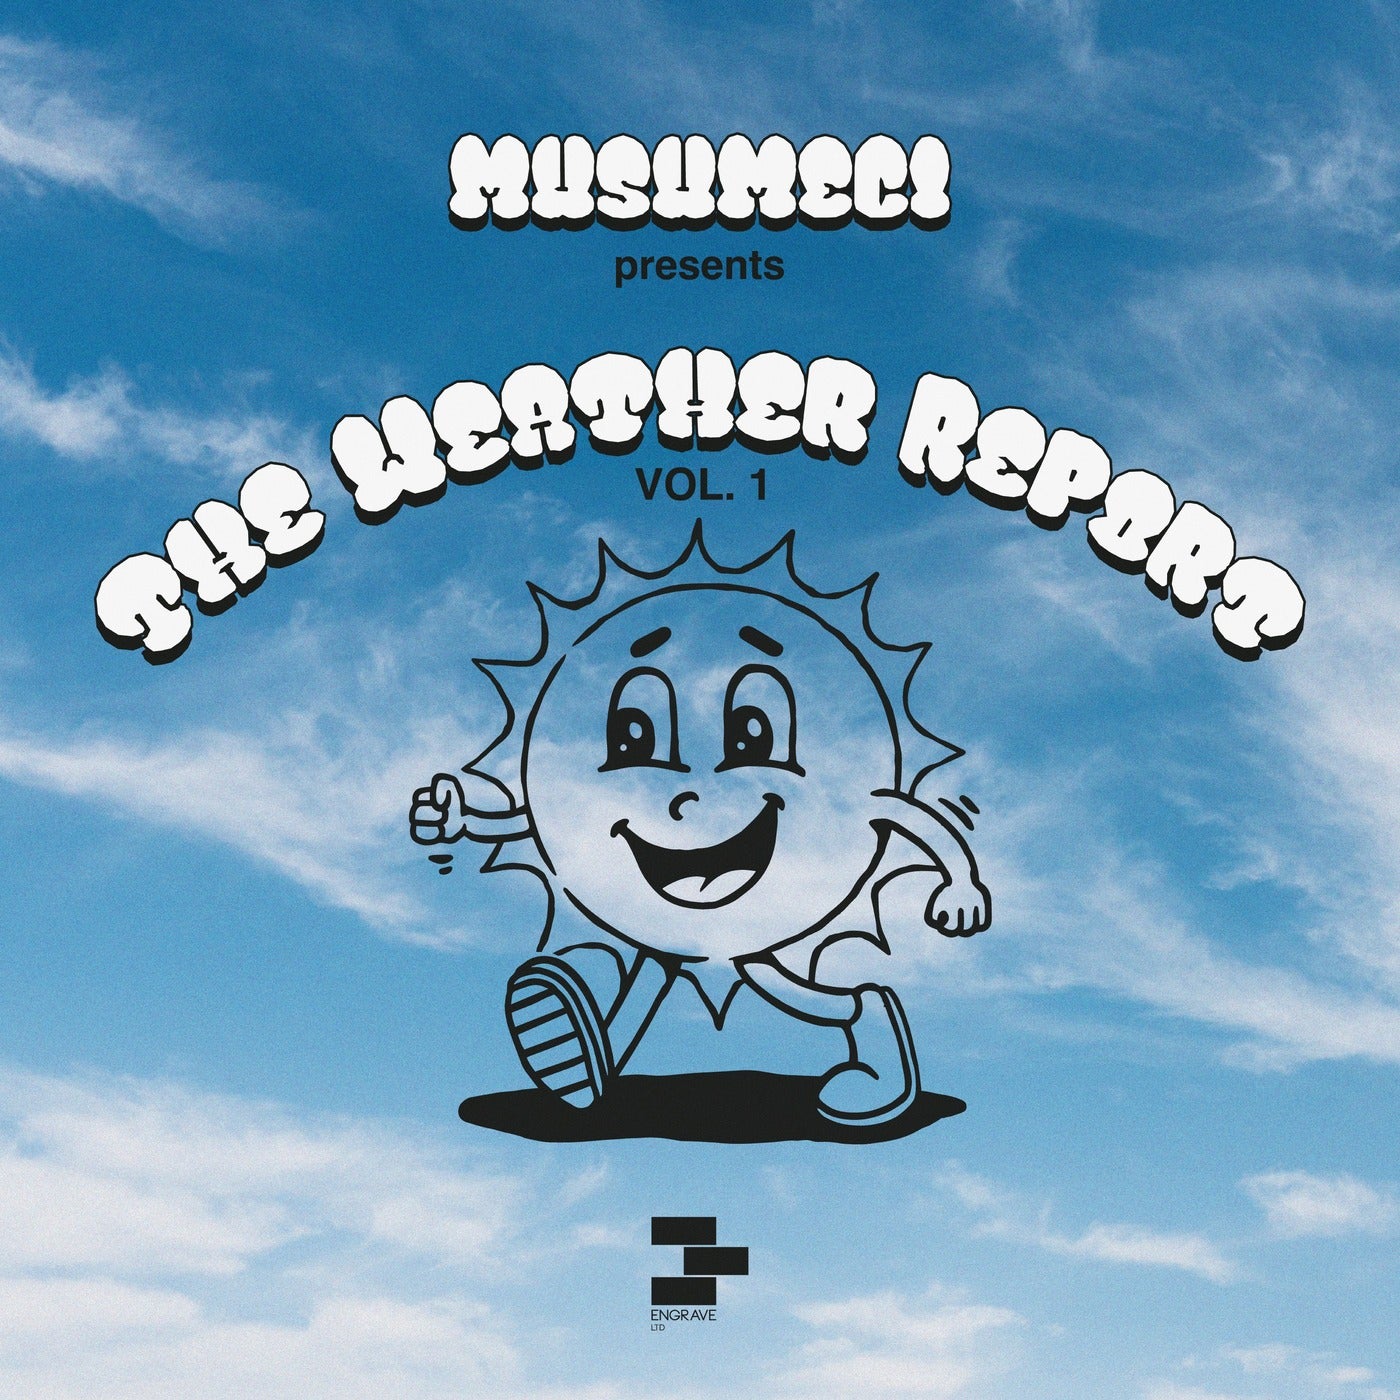 image cover: VA - The Weather Report, Vol. 1 on Engrave LTD